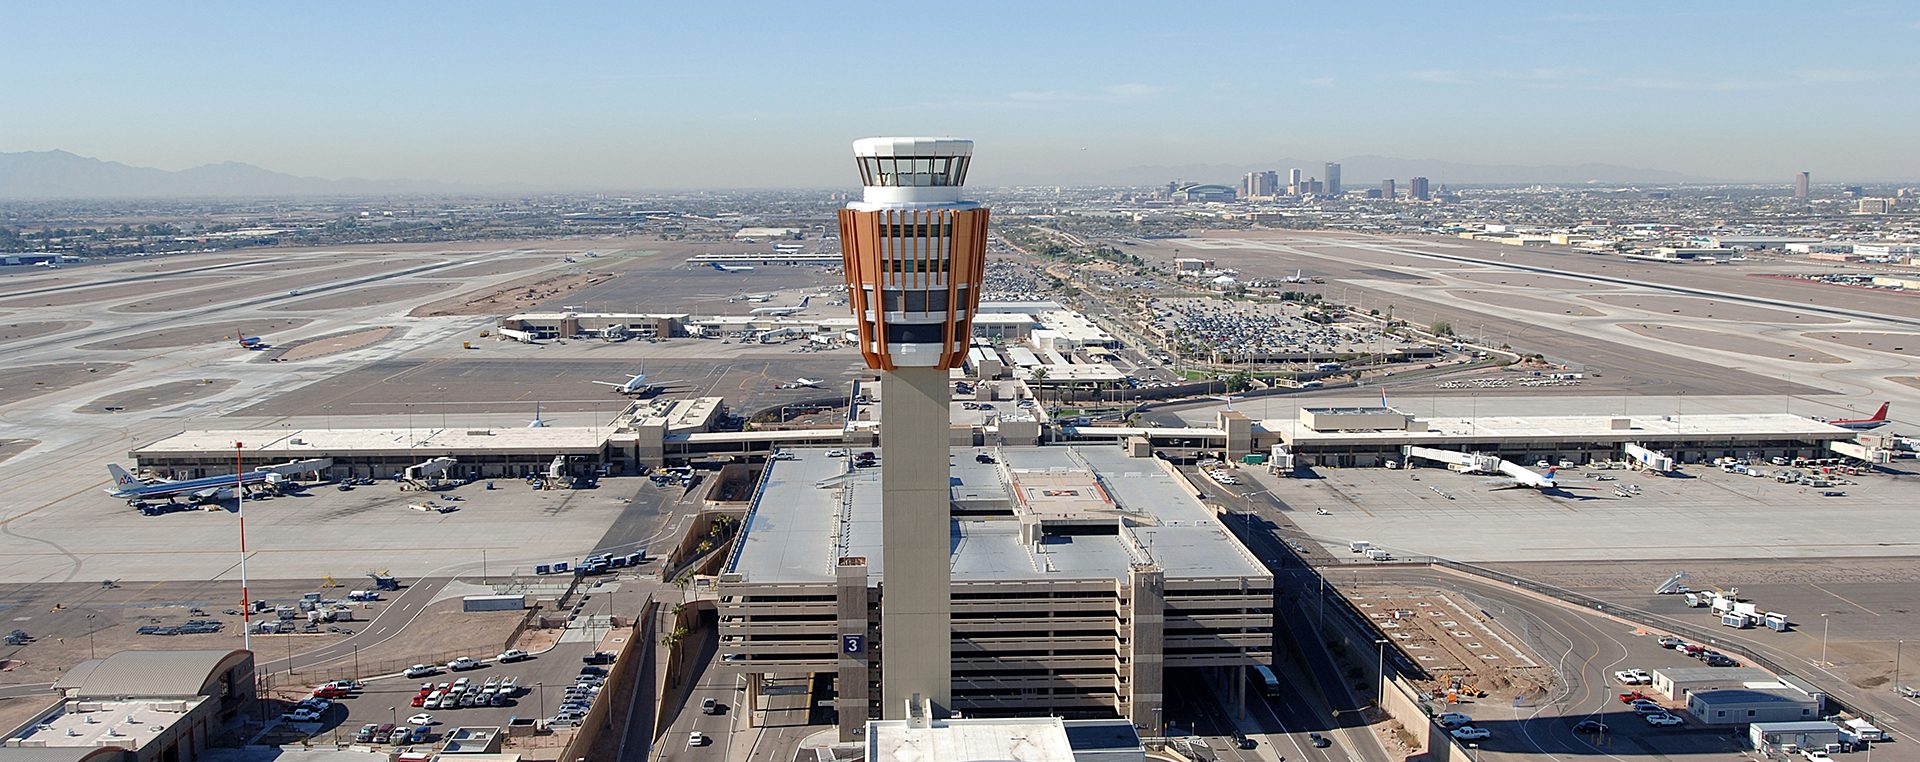 MKB Construction Services provides an impressive aerial view of an airport.